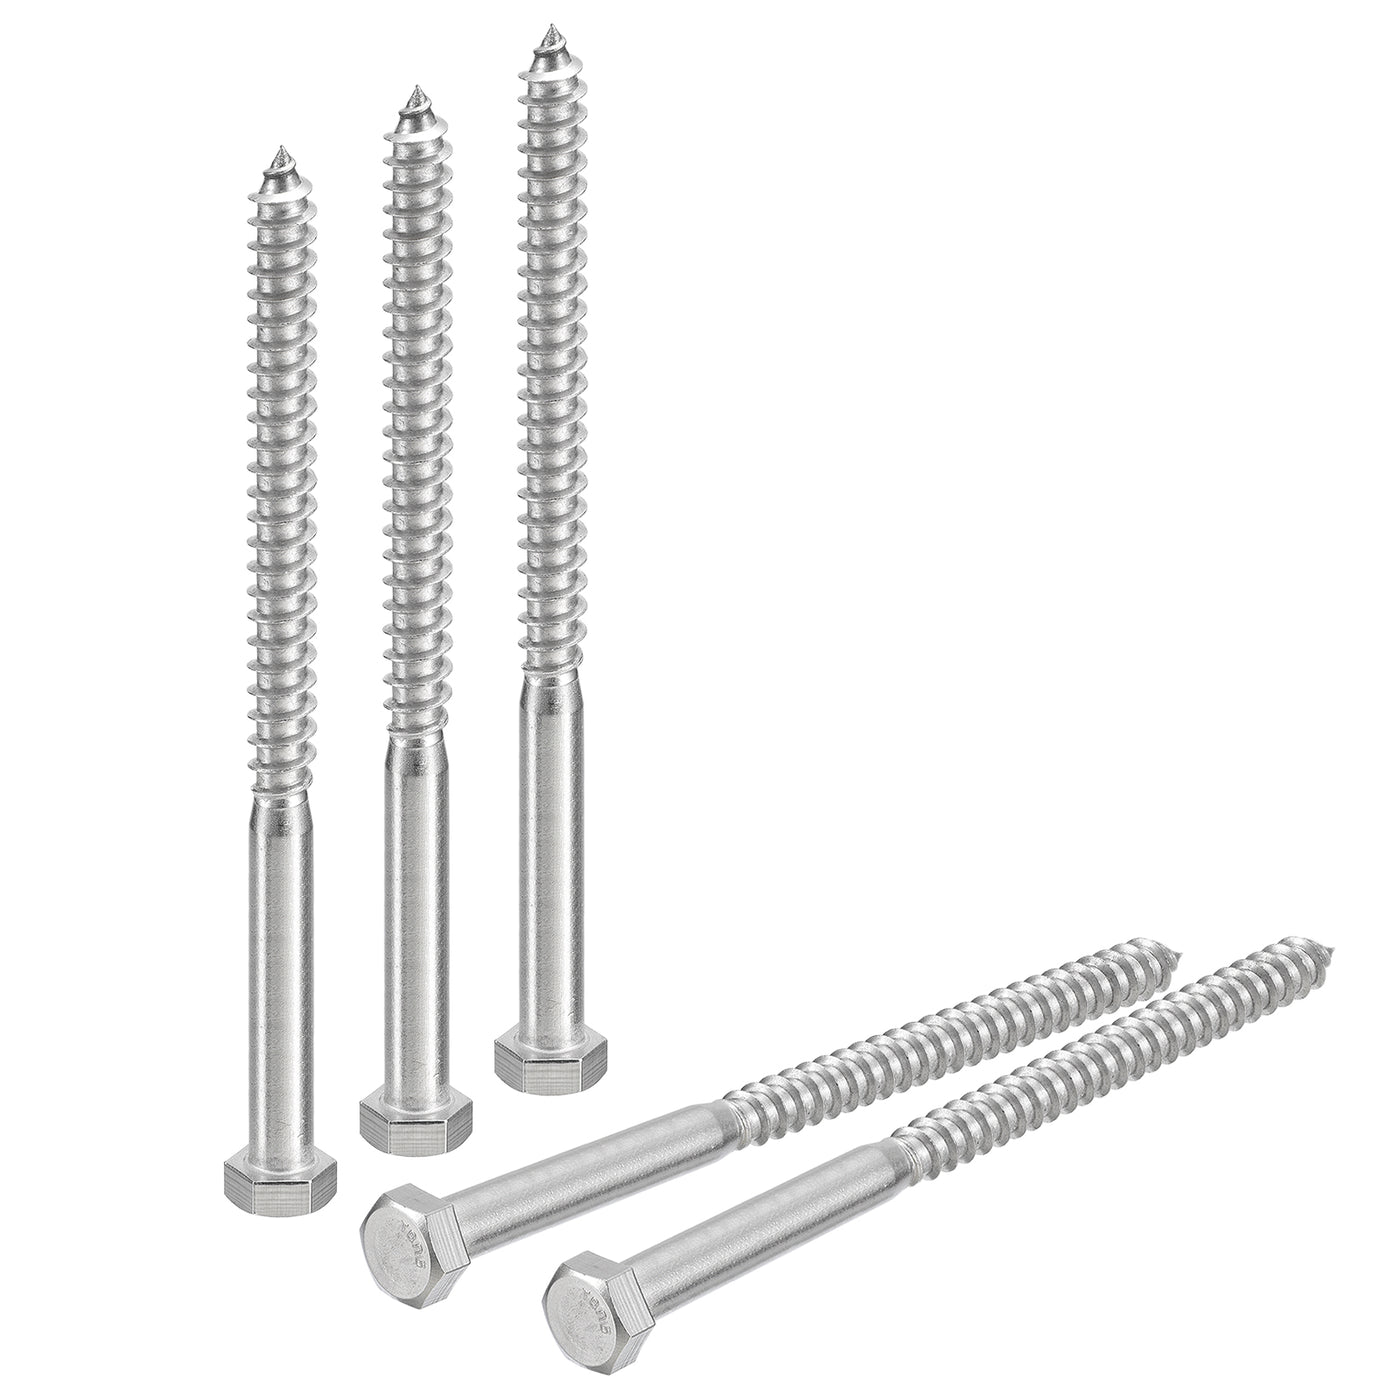 uxcell Uxcell Hex Head Lag Screws Bolts, 5pcs 3/8" x 6" 304 Stainless Steel Wood Screws